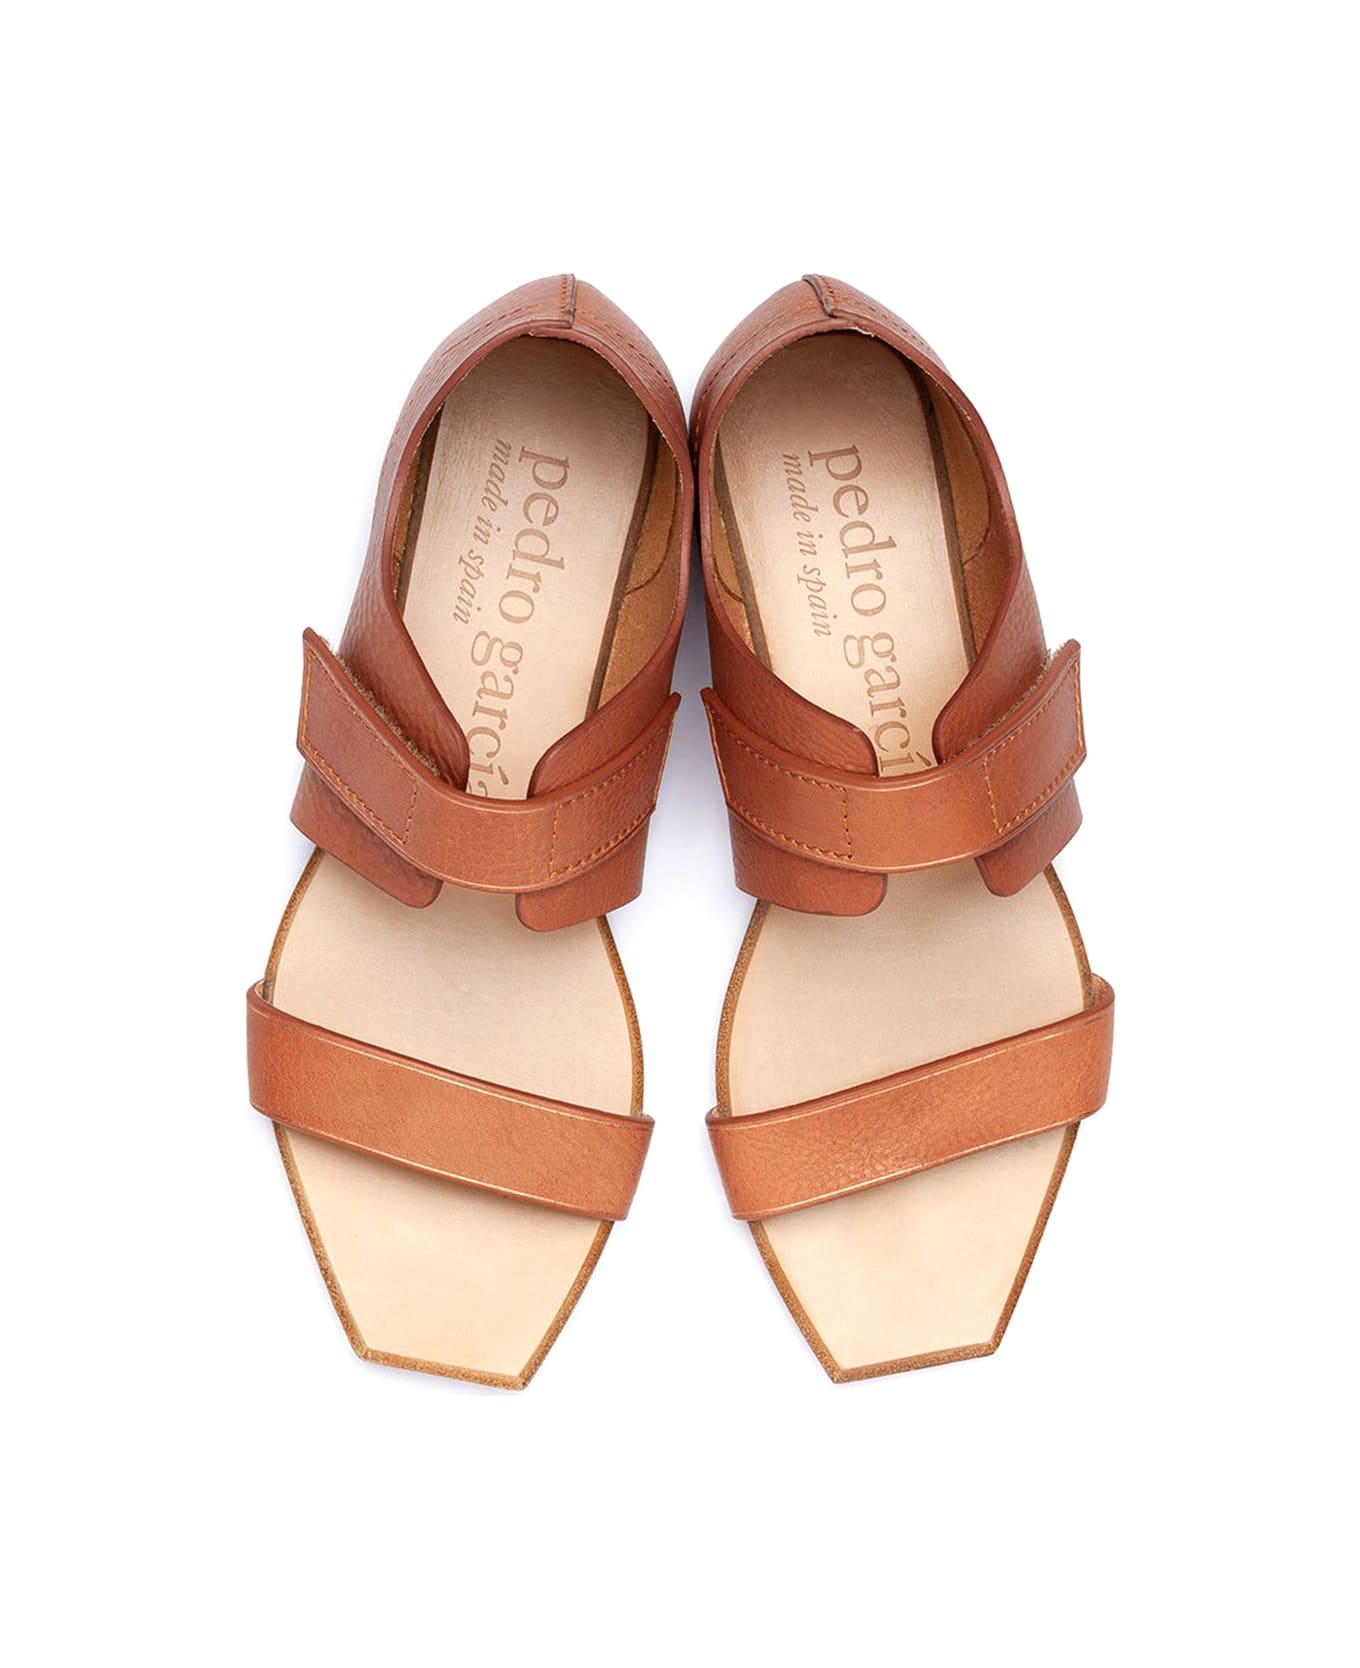 Pedro Garcia Vivi Flat Sandal In Tanned Leather - Clay